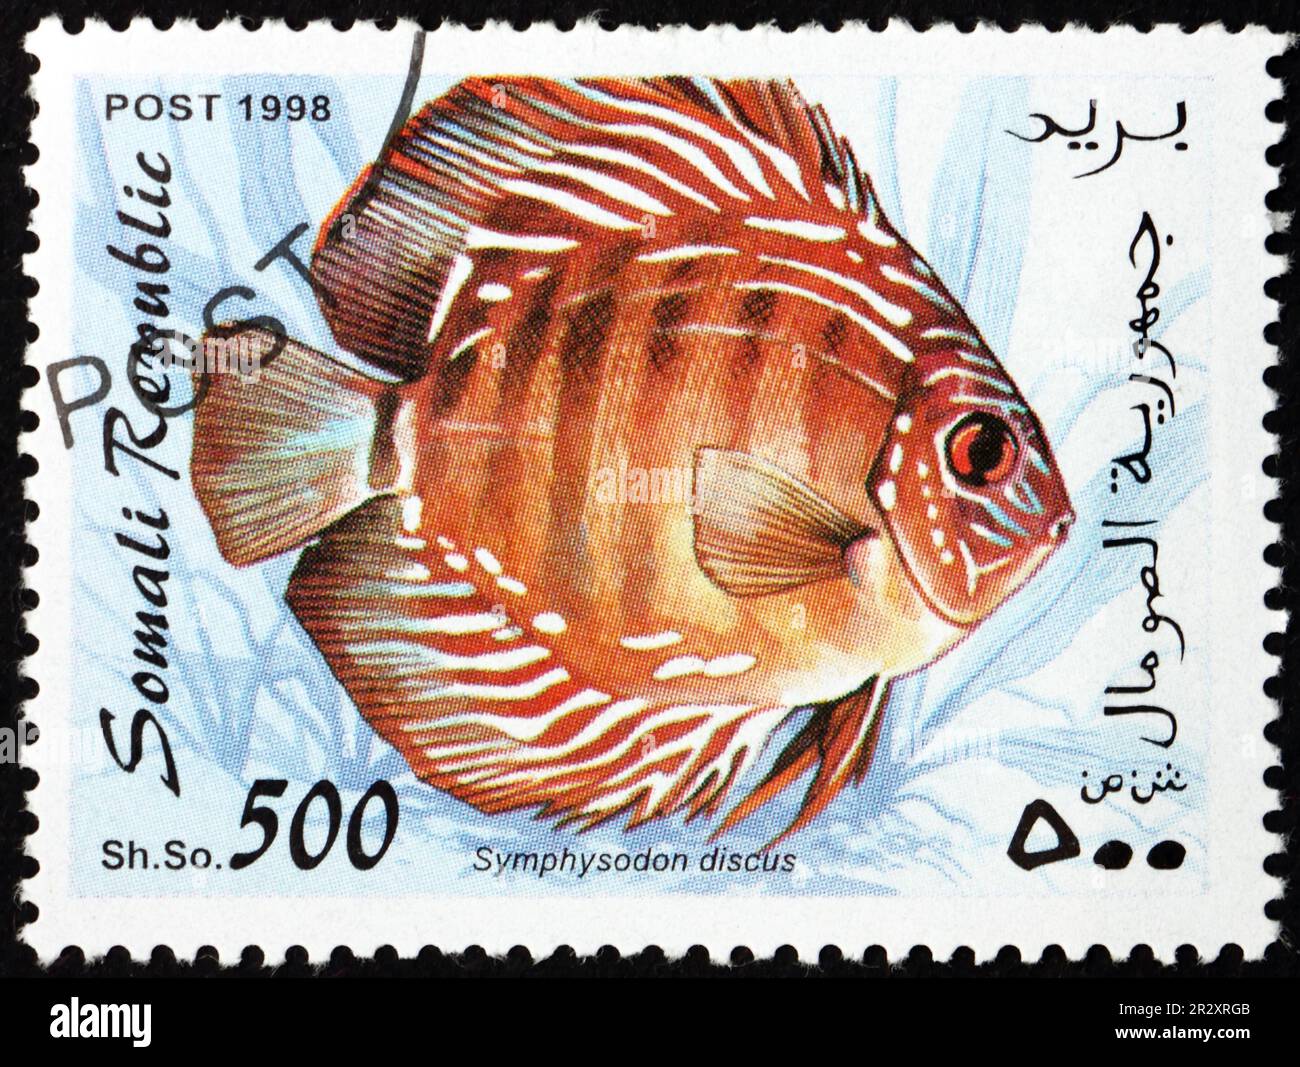 SOMALIA - CIRCA 1998: a stamp printed in Somalia shows red discus, symphysodon discus, is a species of cichlid native to the Amazon Basin, circa 1998 Stock Photo